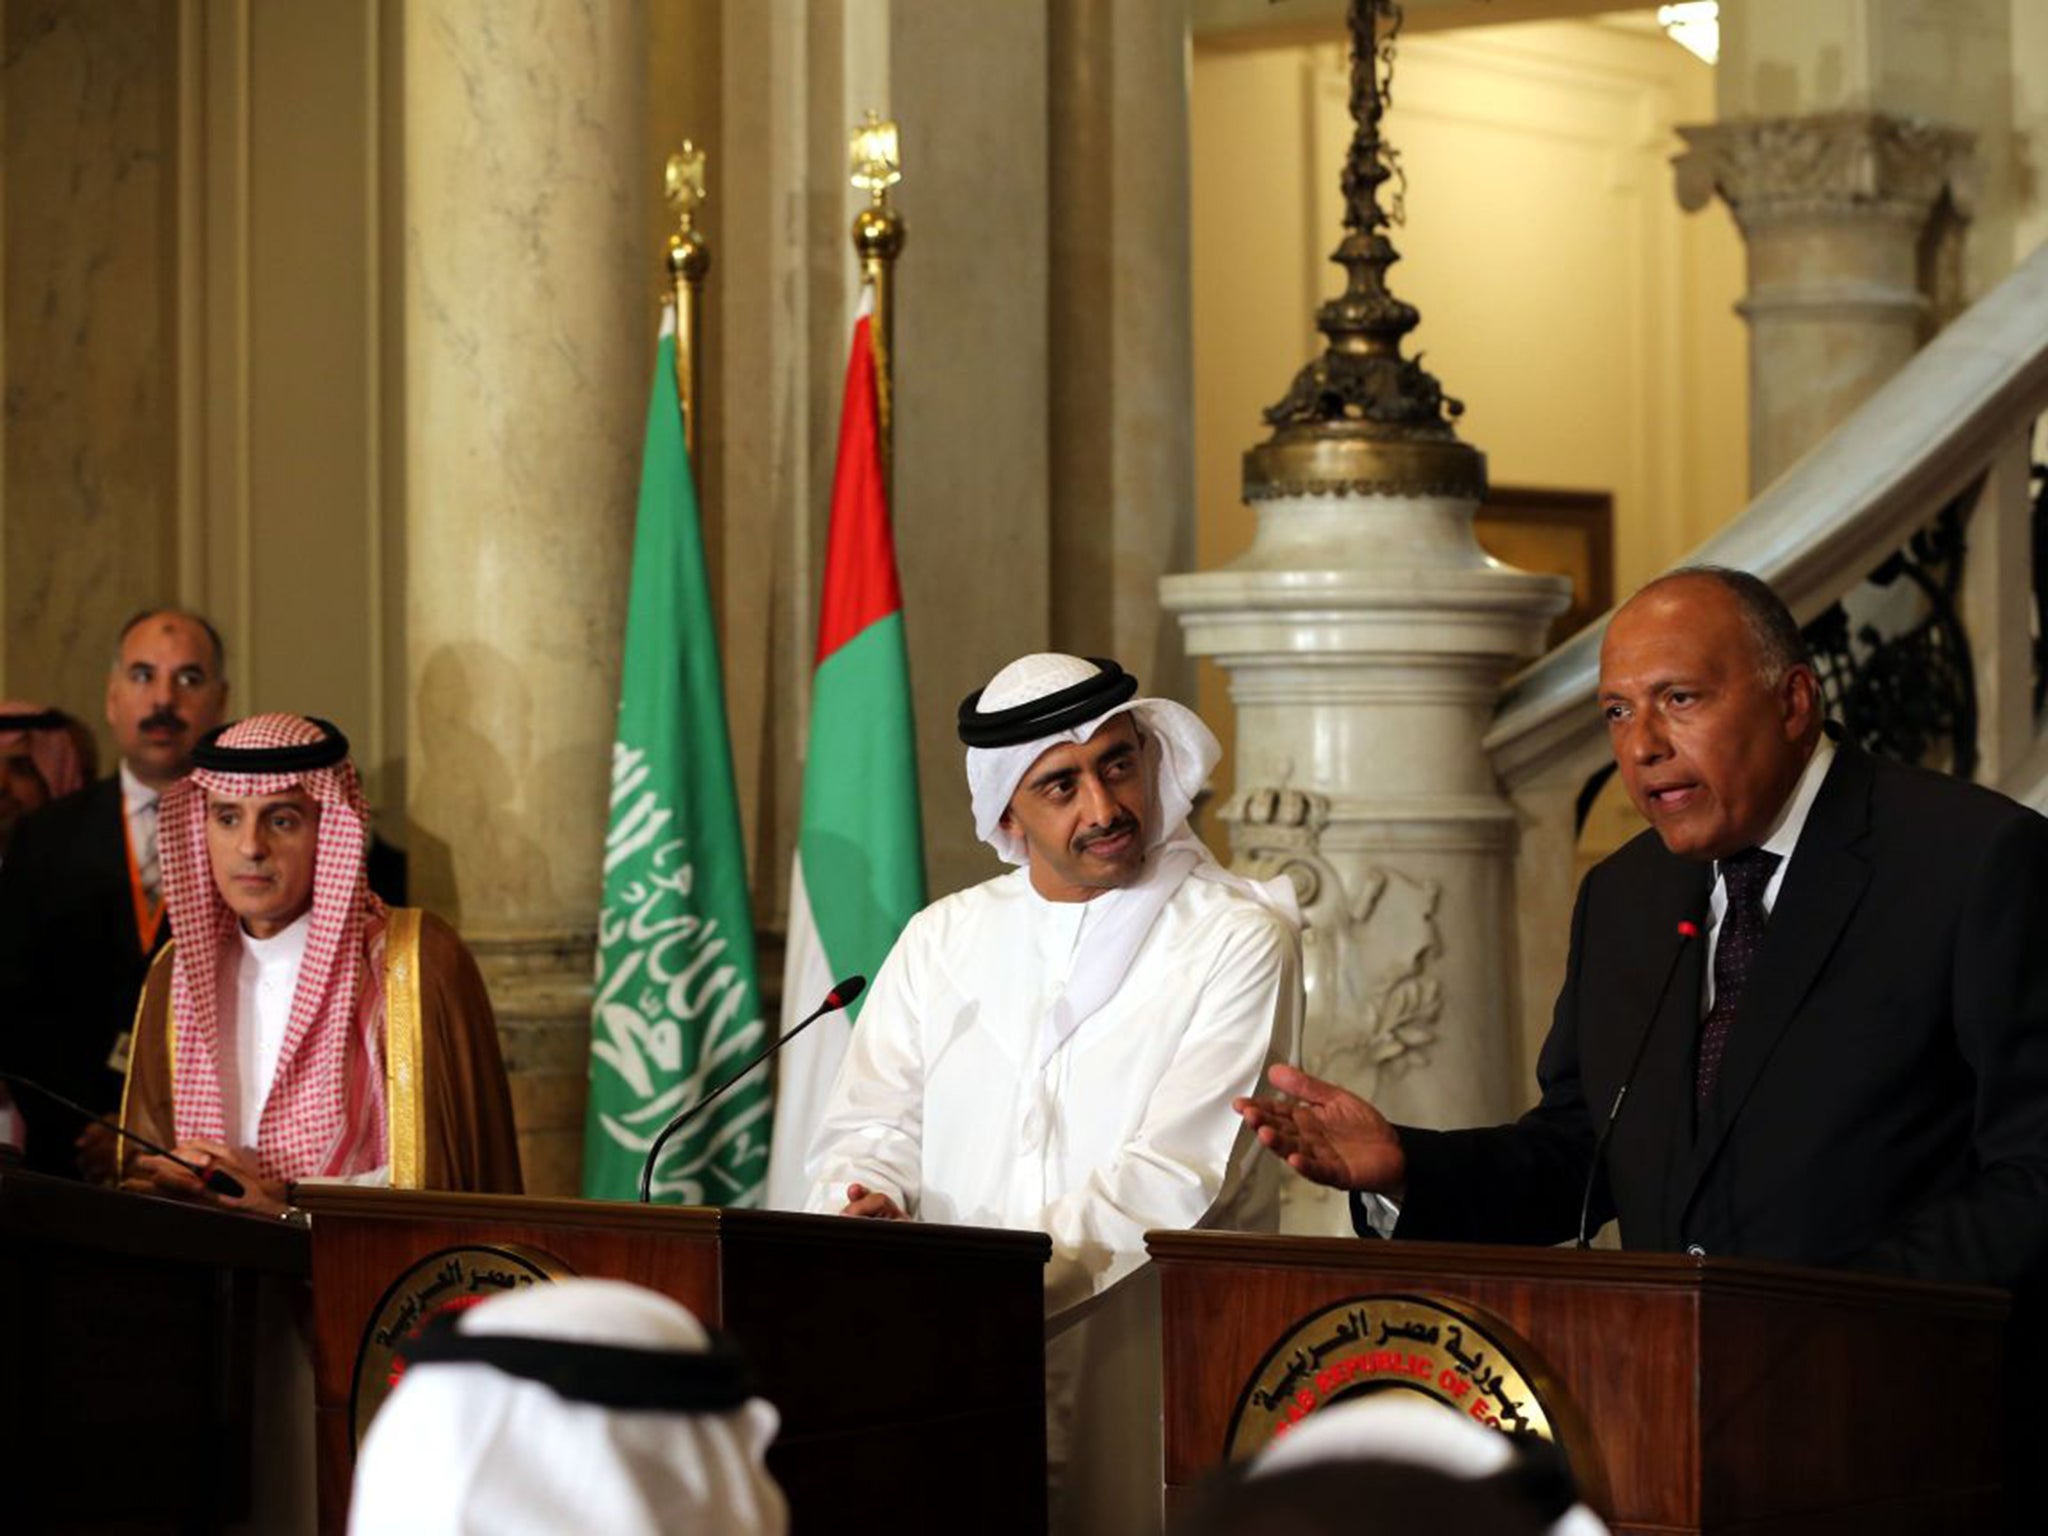 Egyptian Foreign Minister Sameh Shoukry (right) in a joint press conference with UAE Minister of Foreign Affairs Abdullah bin Zayed Al-Nahyan (C) and Saudi Foreign Minister Adel al-Jubeir, in Cairo